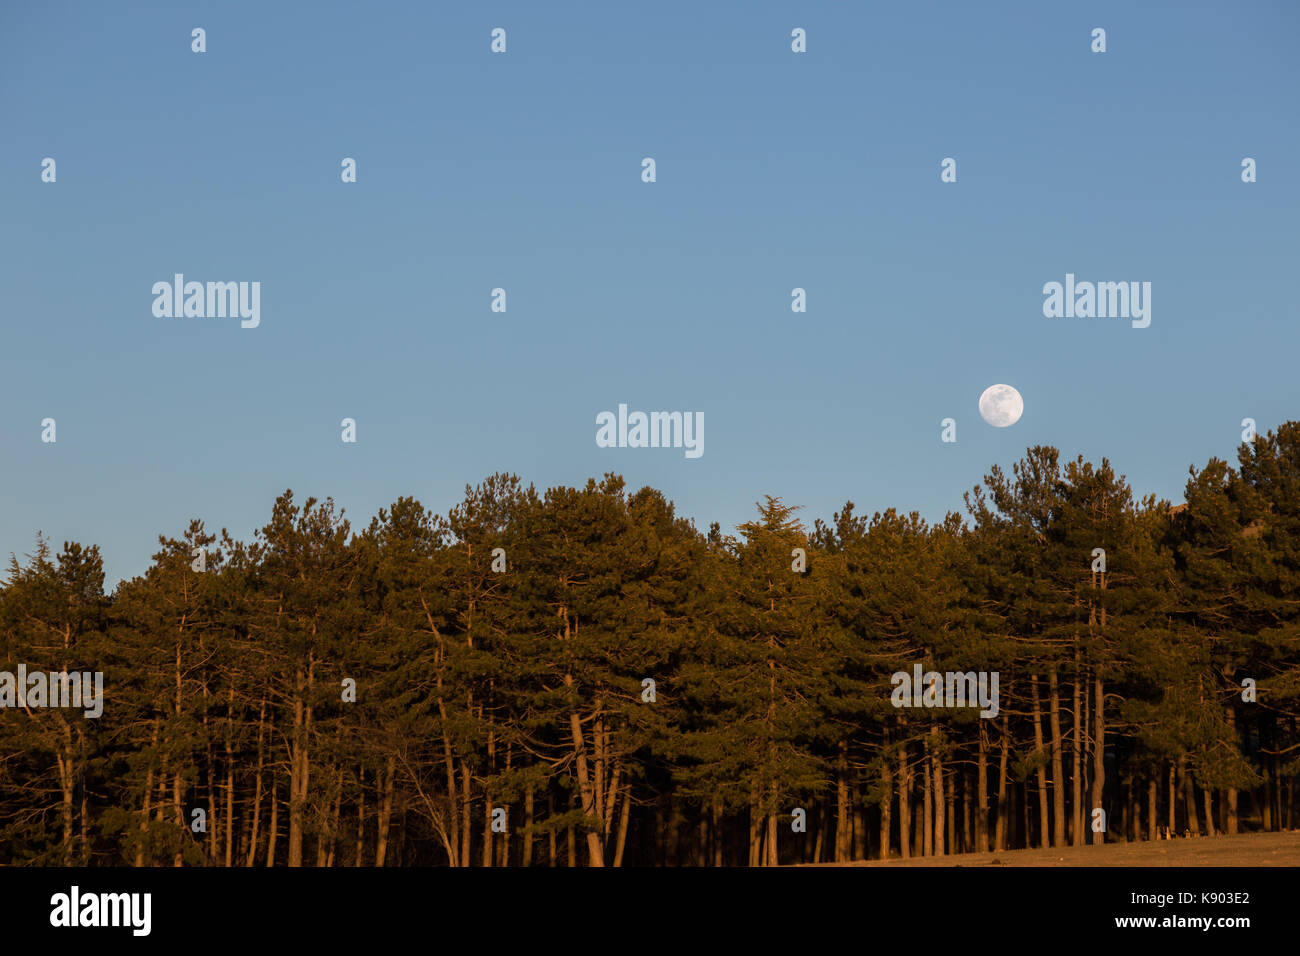 Moon rising up behind some trees in a forest, with warm sunset colors Stock Photo